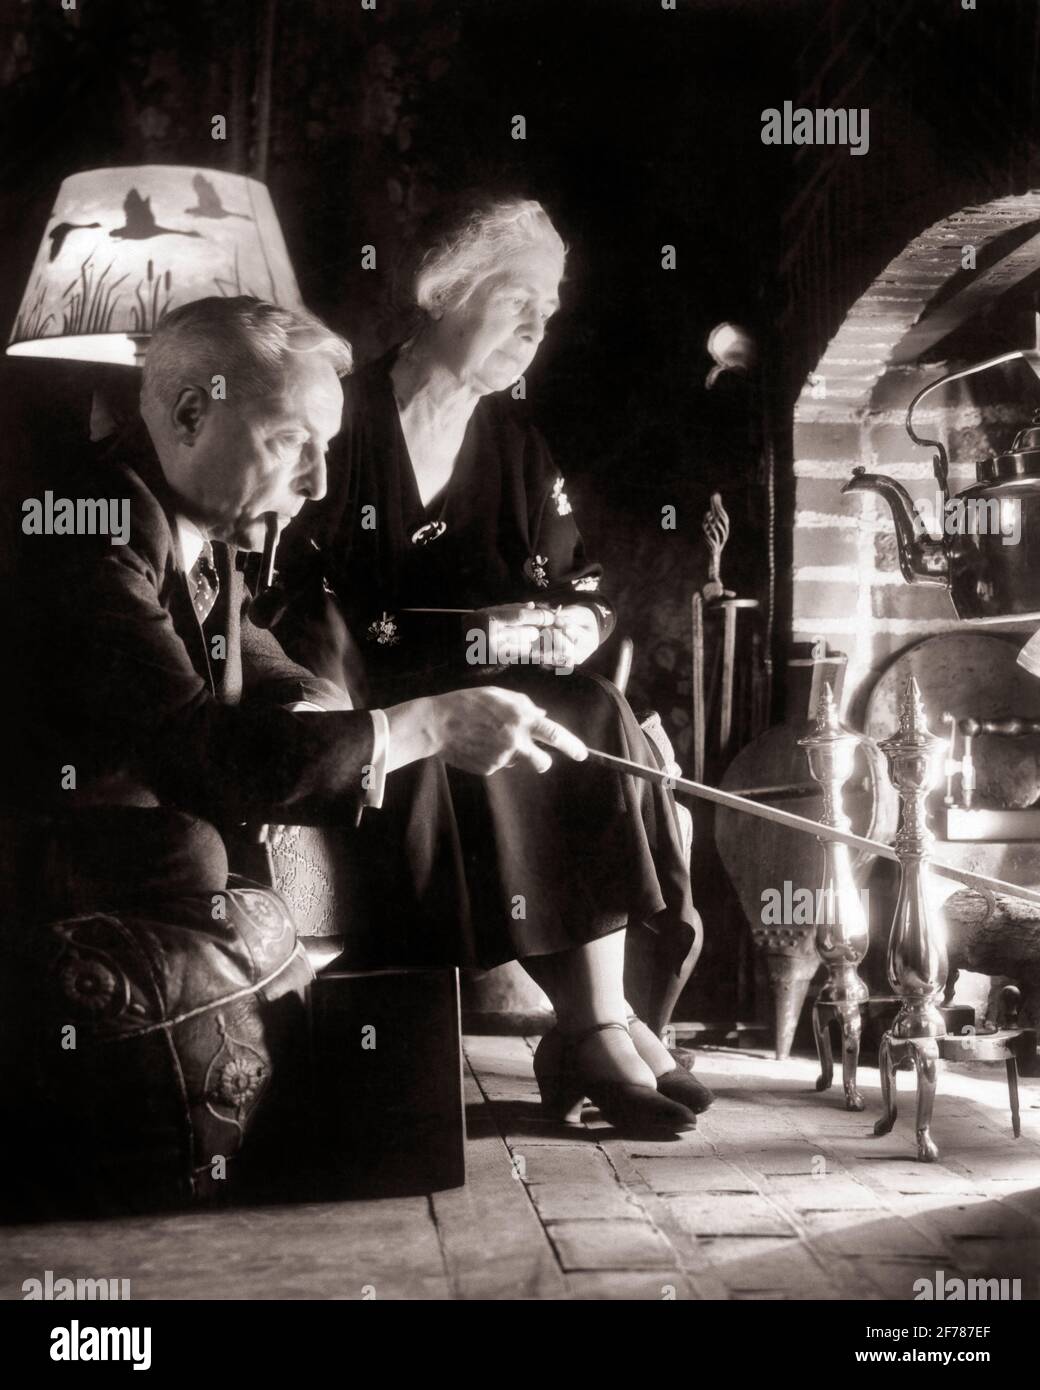 1930s MATURE SENIOR RETIRED COUPLE MAN AND WOMAN SITTING LOOKING INTO BRICK COLONIAL FIREPLACE MAN STOKING FIRE WITH POKER - f921 HAR001 HARS OLD FASHION RETIRED 1 SECURITY MYSTERY STRONG JOY LIFESTYLE SATISFACTION BRICK ELDER FEMALES MARRIED PIPE RURAL HEAT SPOUSE HUSBANDS HOME LIFE COPY SPACE FRIENDSHIP HALF-LENGTH LADIES PERSONS INSPIRATION CARING MALES WARM RETIREMENT SENIOR MAN SENIOR ADULT B&W PARTNER SENIOR WOMAN COMFORT POKER RETIREE HAPPINESS OLD AGE OLDSTERS OLDSTER LEISURE PIPES TOBACCO DRAMATIC LAMPSHADE BAD HABIT SMOKER ELDERS NICOTINE CONNECTION CONCEPTUAL WARMTH ADDICTIVE COZY Stock Photo